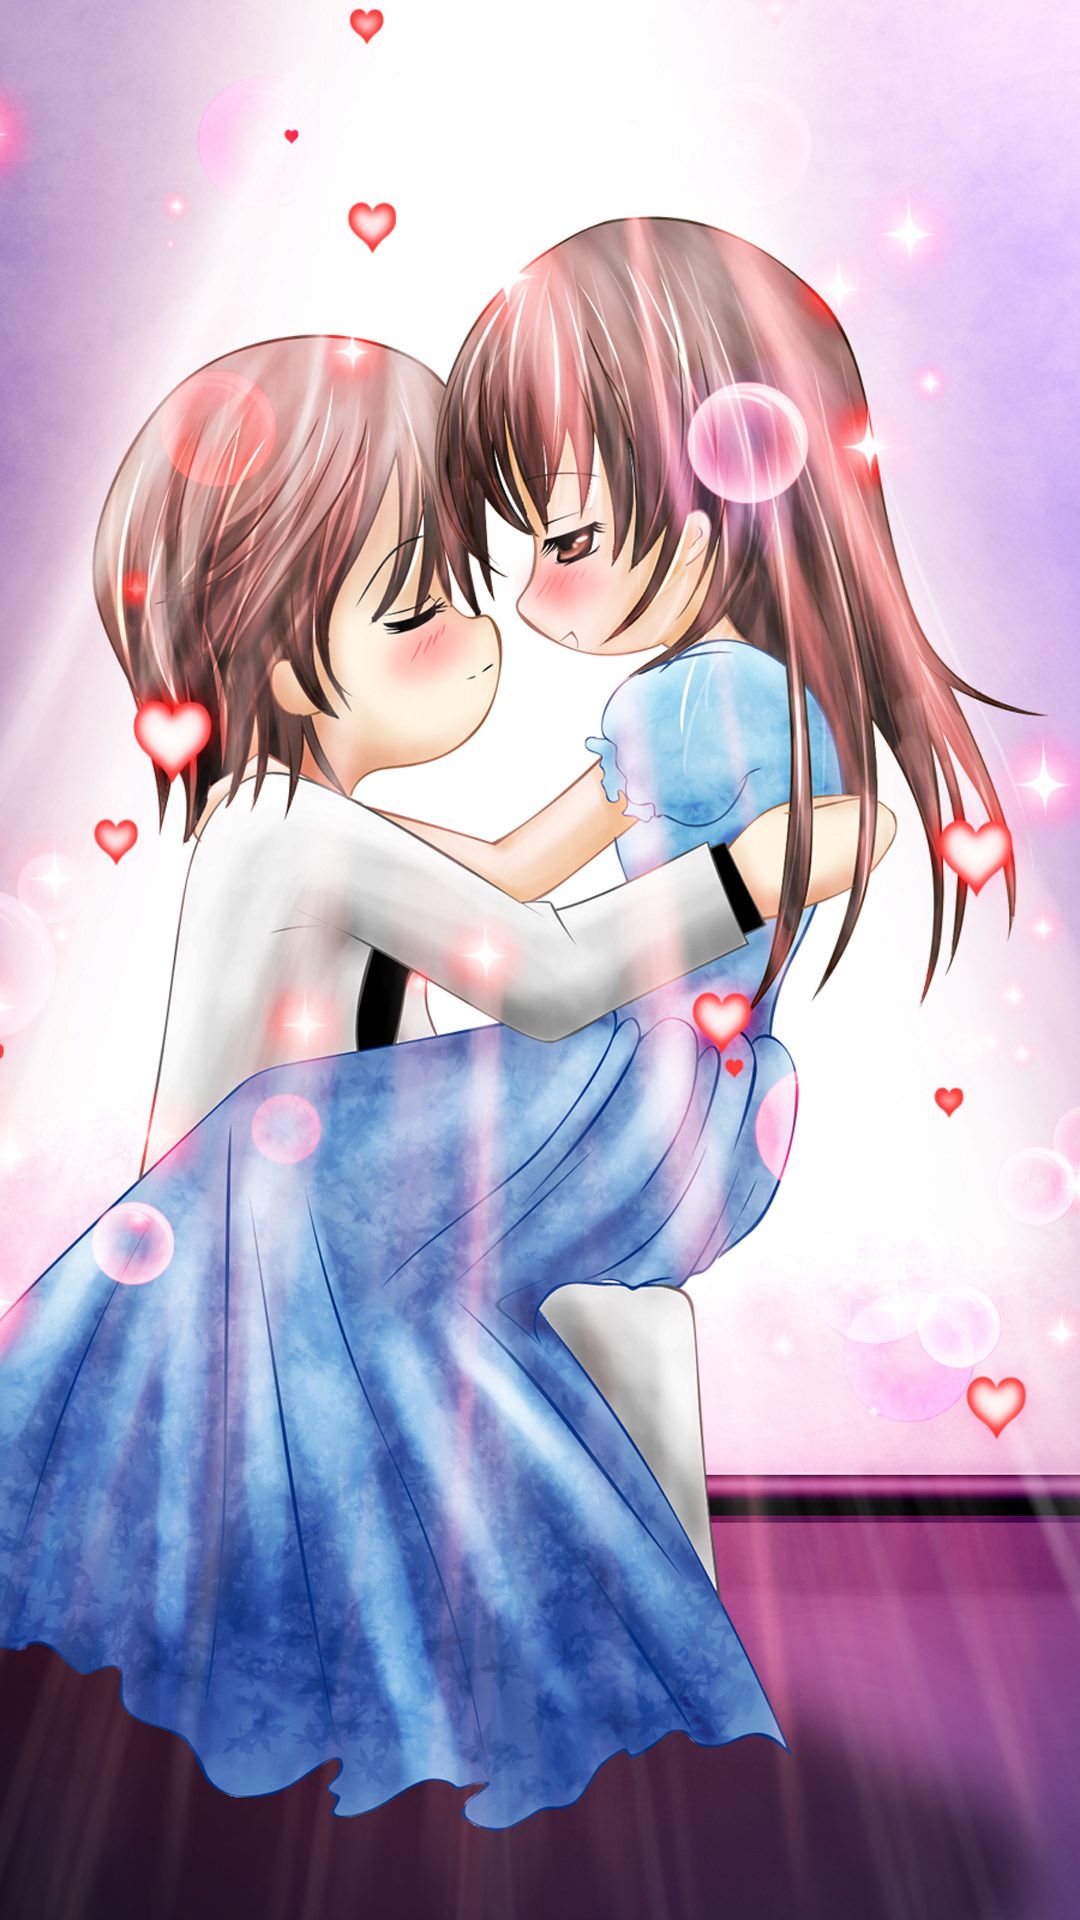 Love Couple Cute Anime Wallpapers on